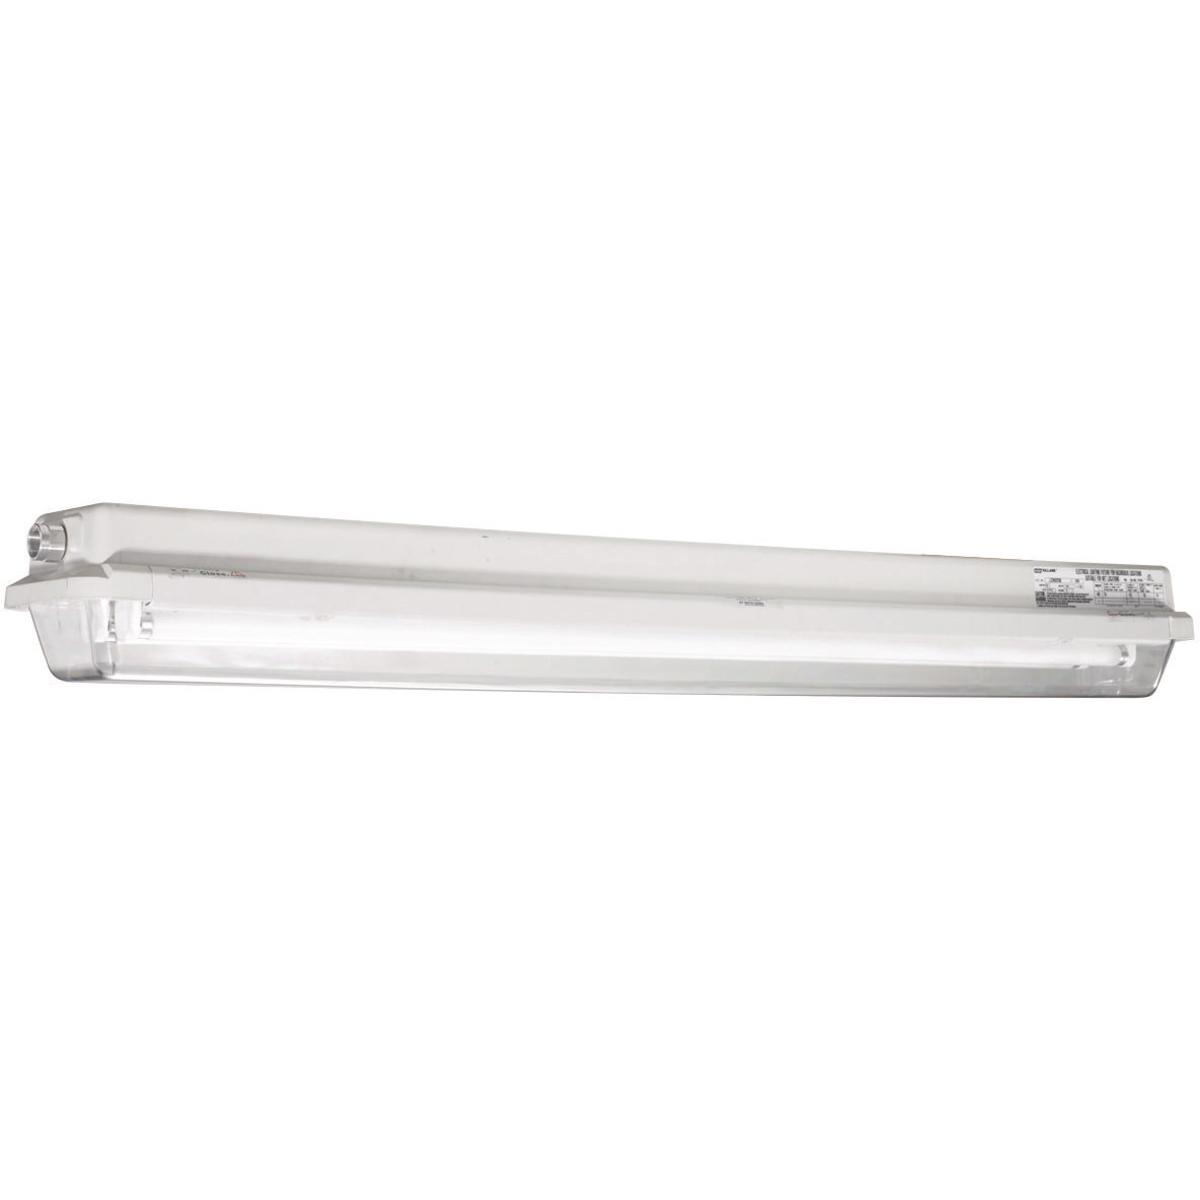 Hubbell LZ2N28330 LZ2N Series - Non-Metallic 28 Watt Fluorescent Light Fixture (Three 4-Foot Lamps Not Included) - Double-Ended Lamp Type - 120-277V At 50/60Hz - Hub Size 3/4 Inch NPT  ; Lexan® Clear Lens, impact resistant polycarbonate ; Housing-one piece fiberglass reinf